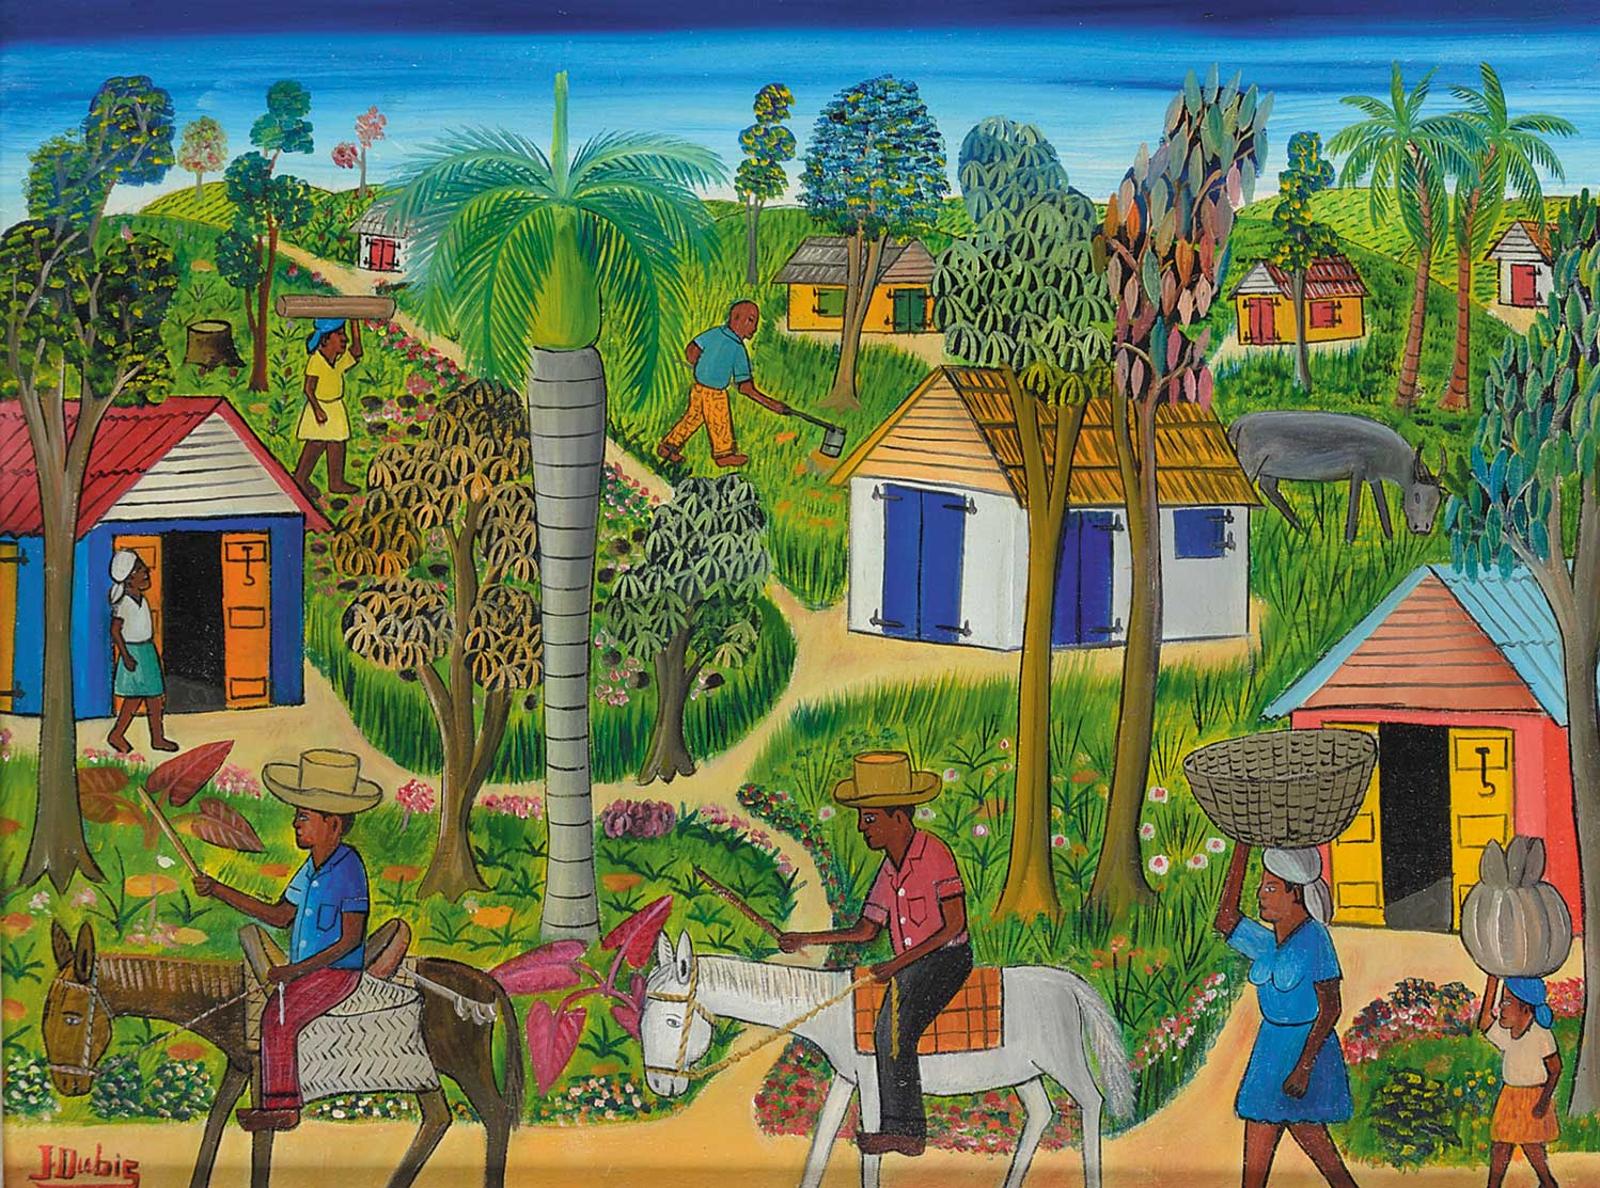 J. Dubic - Untitled - Colourful Village Life